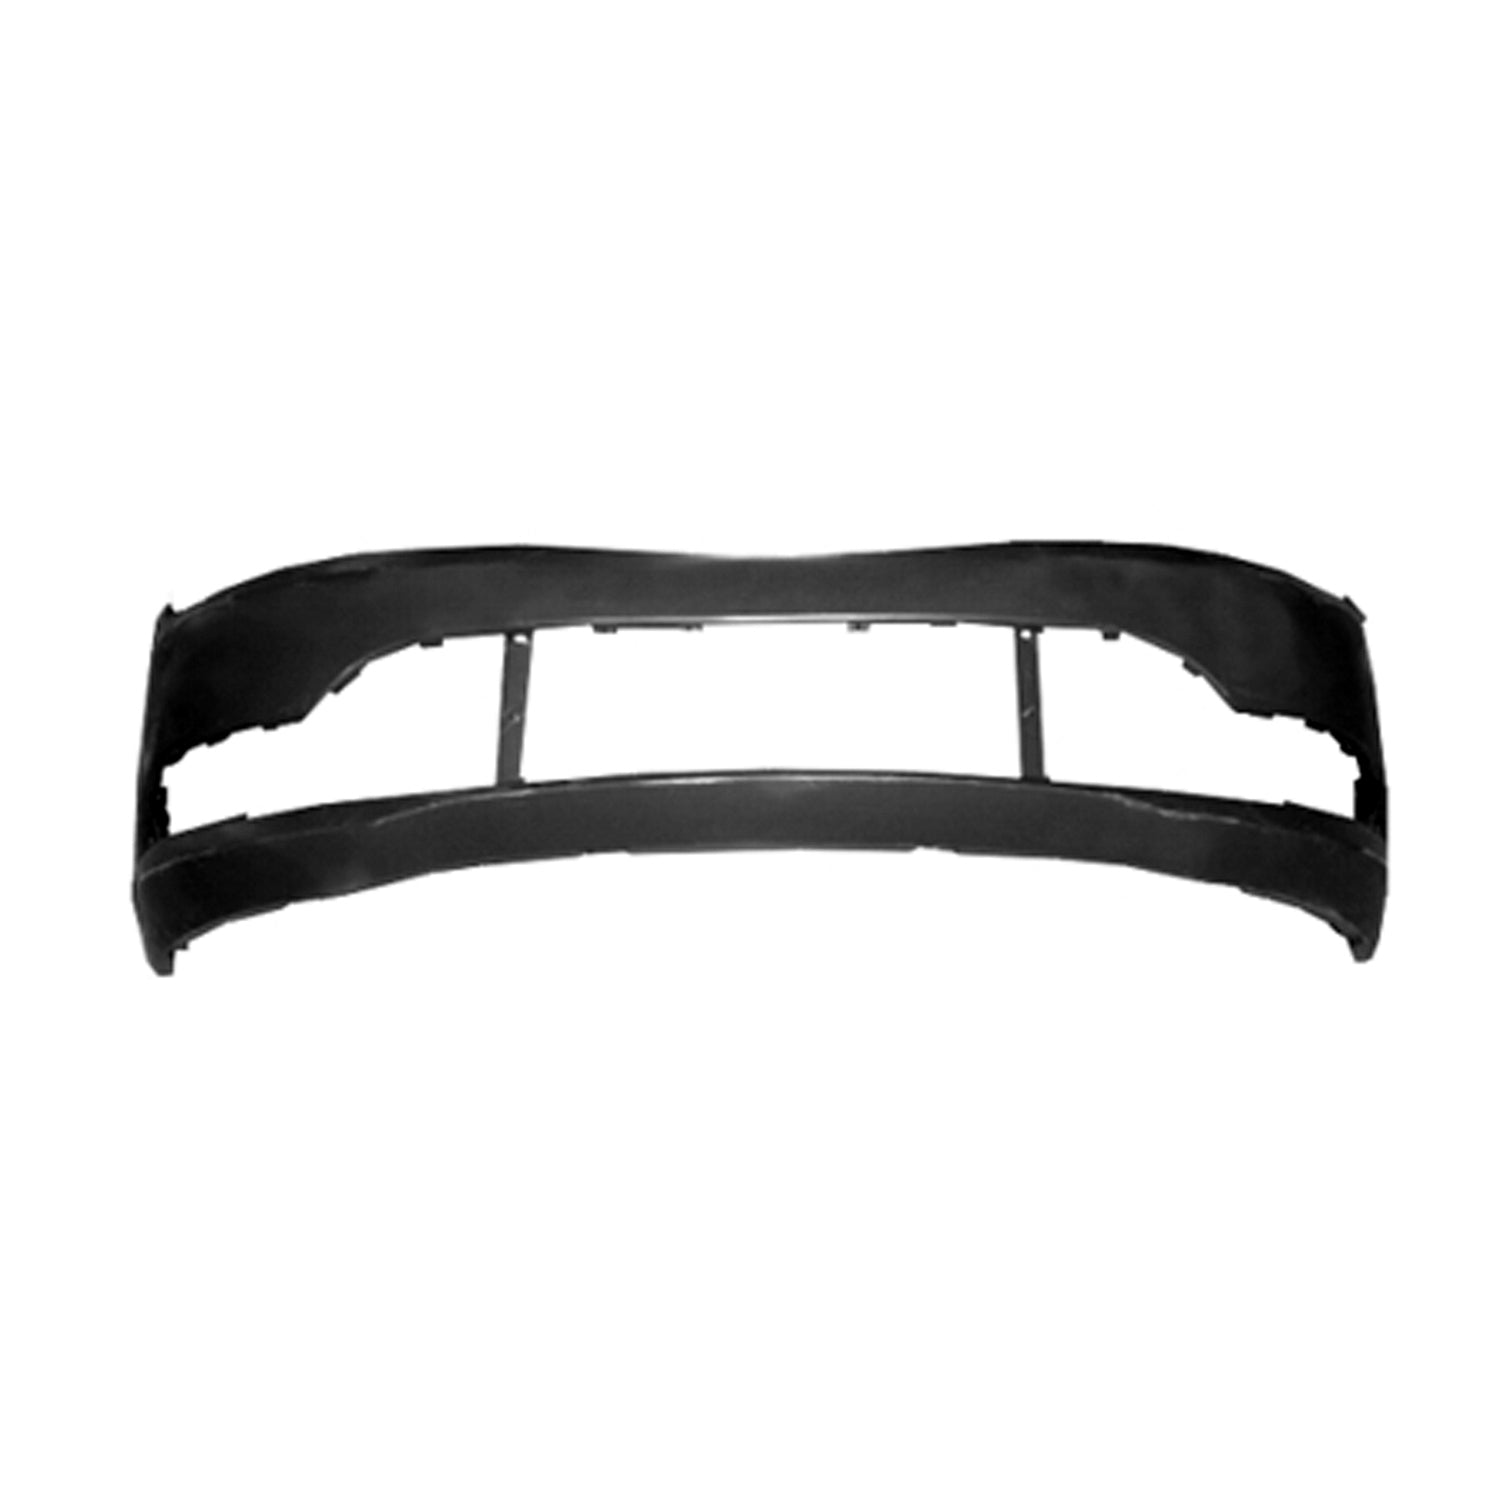 Front bumper cover 2015 - 2017 CHRYSLER 200 RECONDITIONED CH1000A15R 1WZ18TZZAE